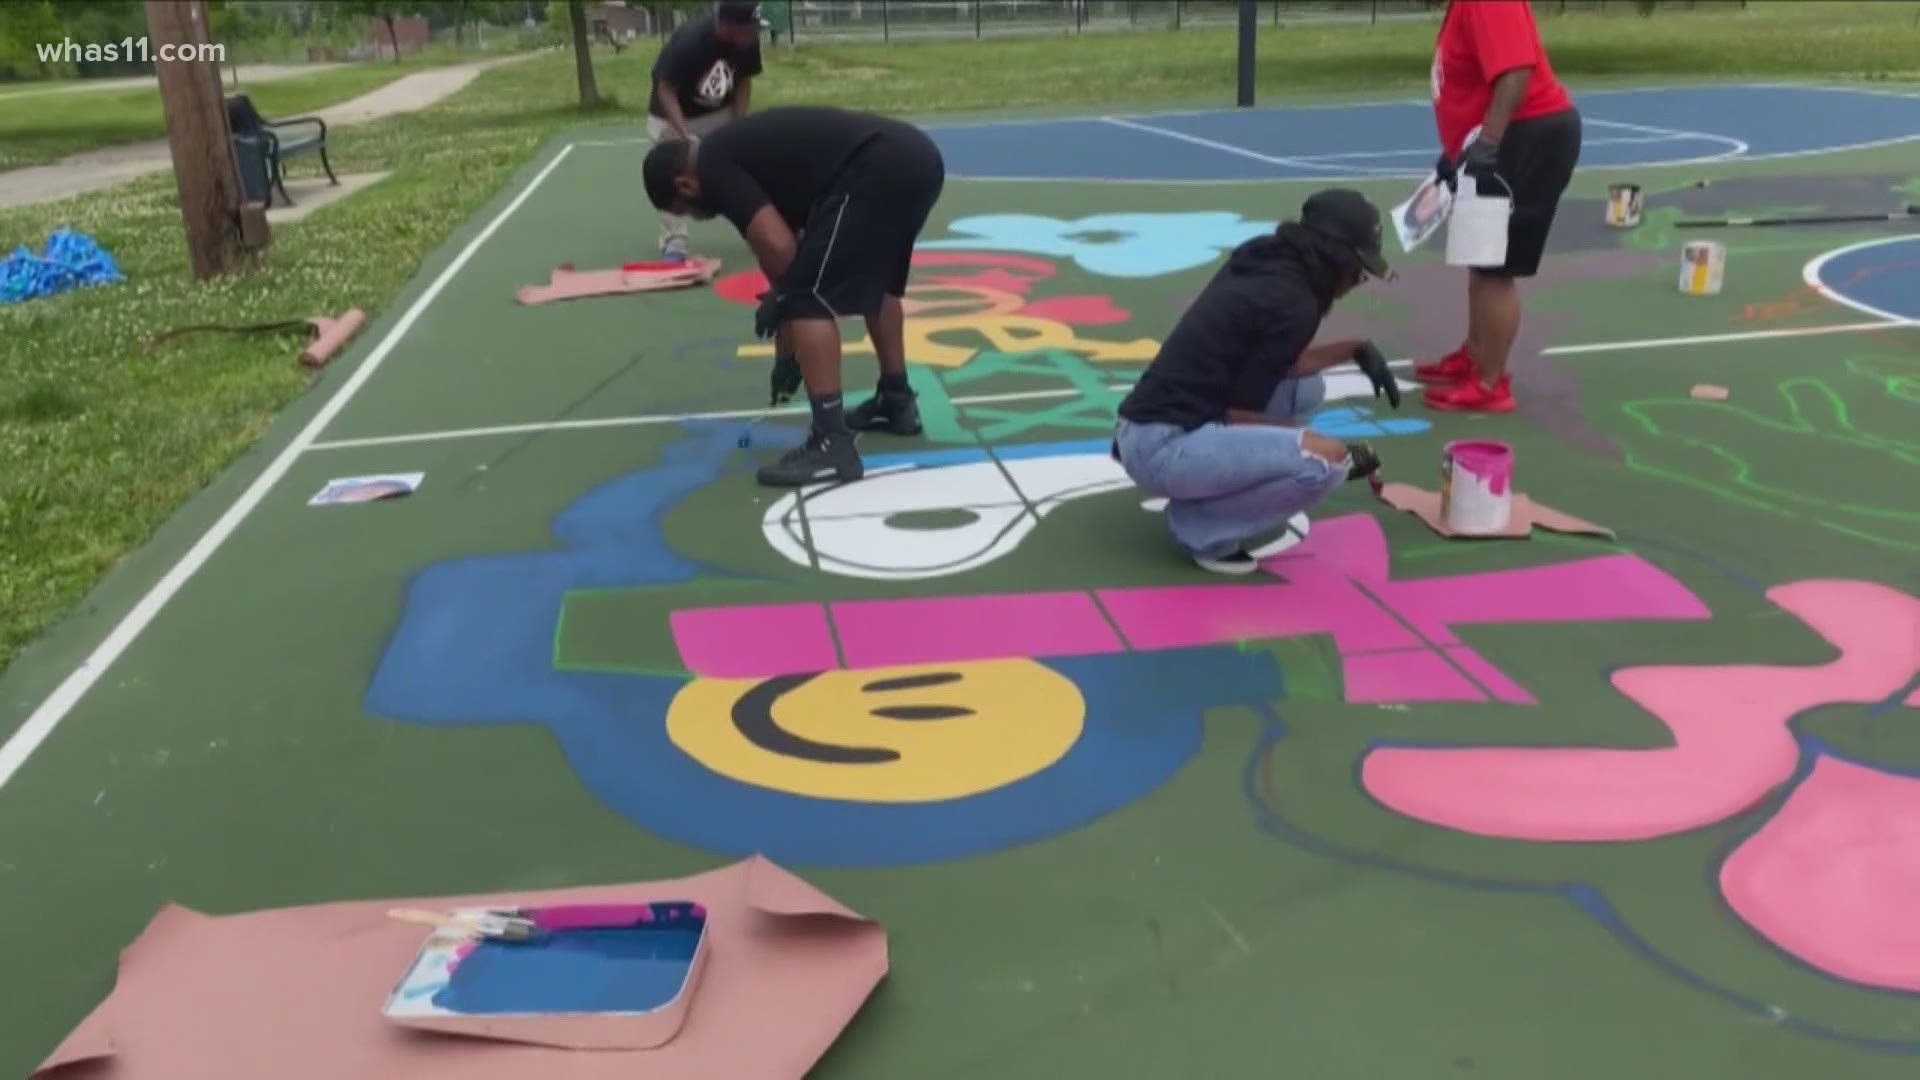 Comacell Brown Jr. spoke to WHAS11 News after learning the mural he created of Breonna Taylor on the basketball courts at Lannan Park was vandalized.